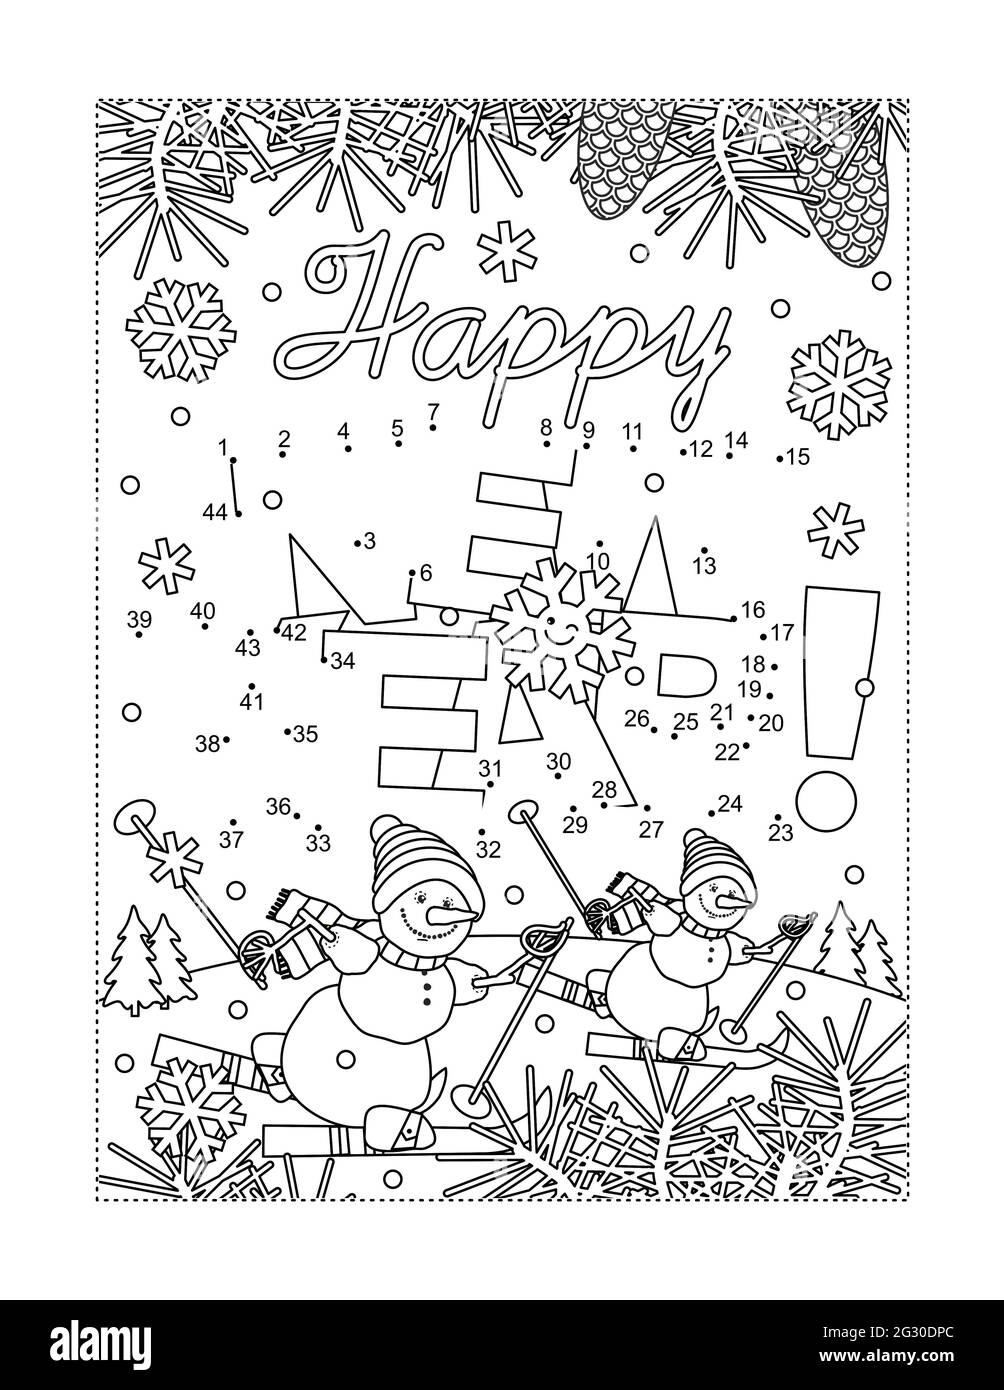 Happy New Year greeting connect the dots puzzle and coloring page wth greeting text and two skiing snowmen in winter scene Stock Photo